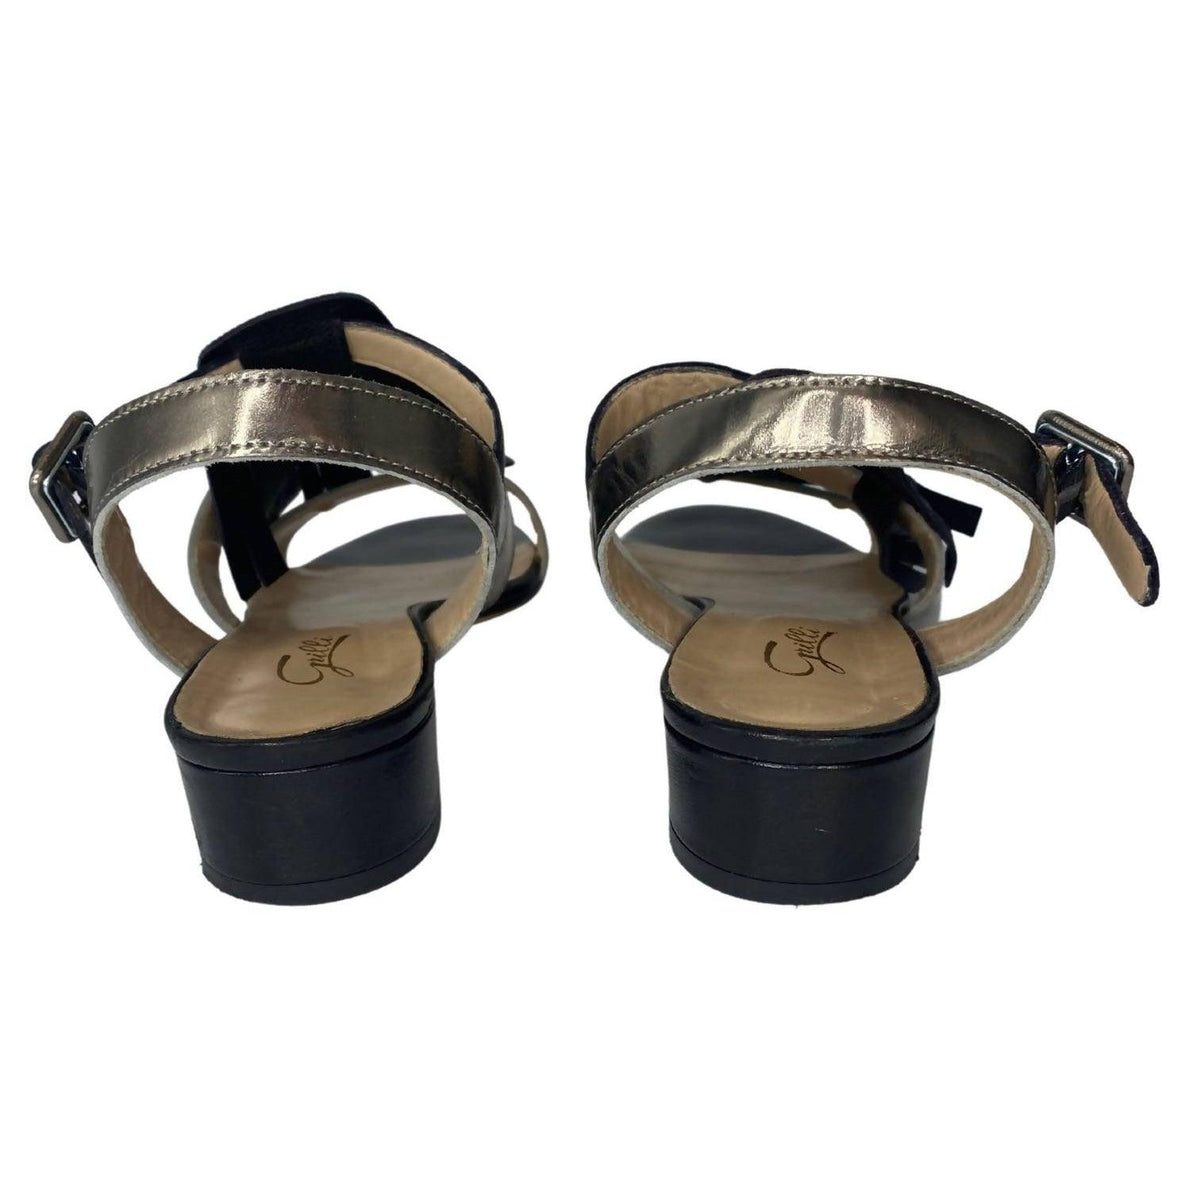 Pre-owned GRILLI Black & Metallic Gold Leather Tassel Sandals | Size US 8 - EU 38 - theREMODA